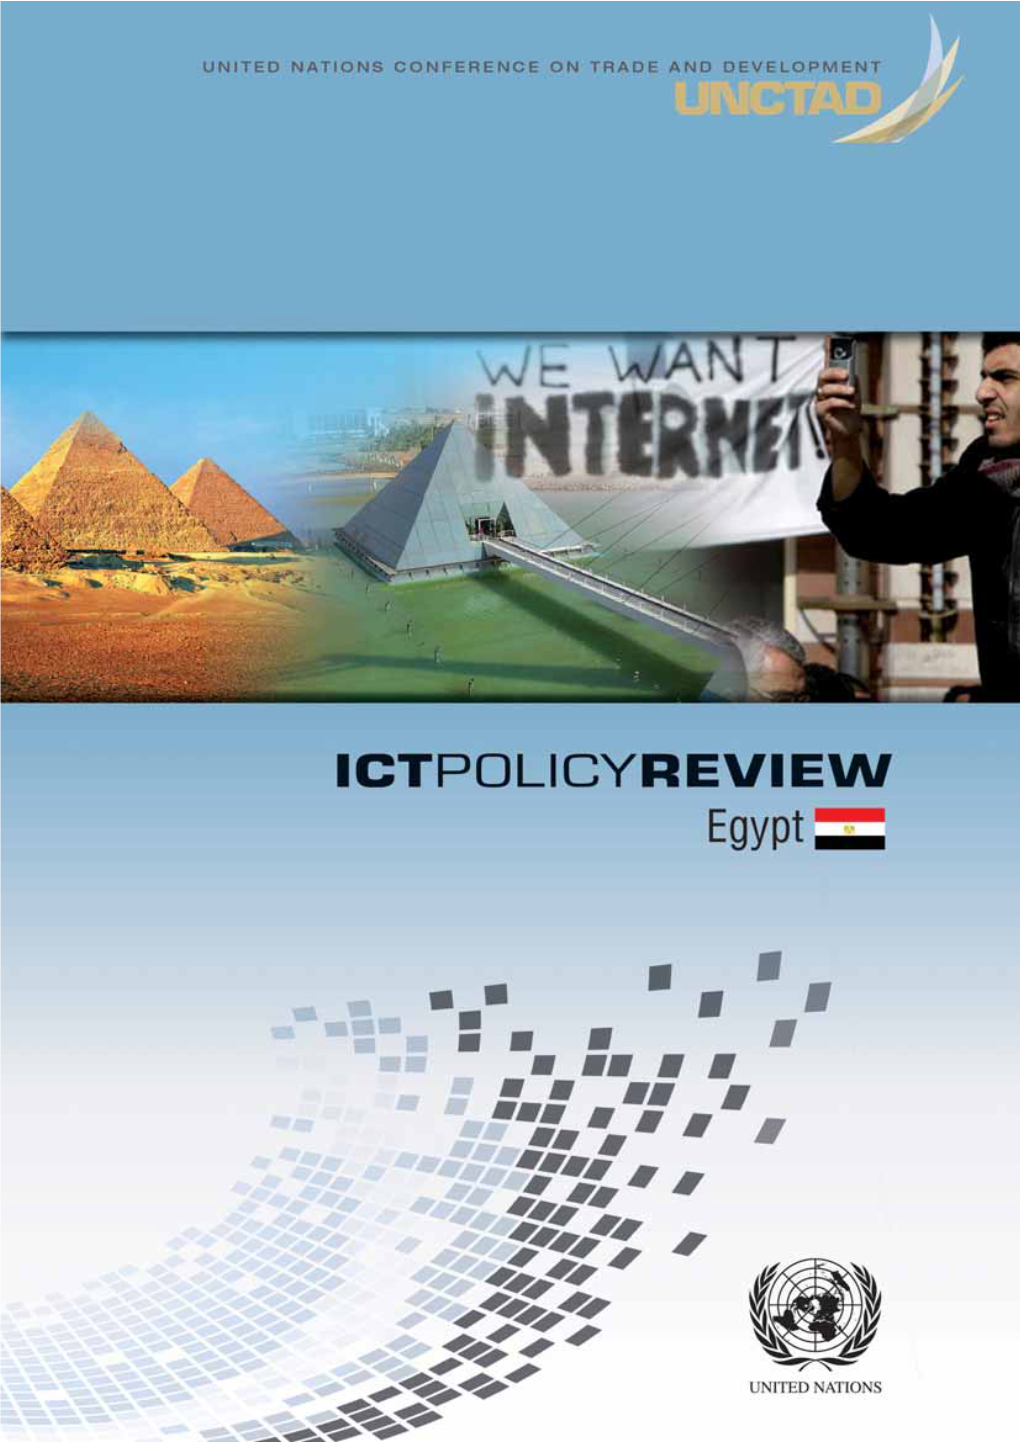 ICT Policy Review of Egypt